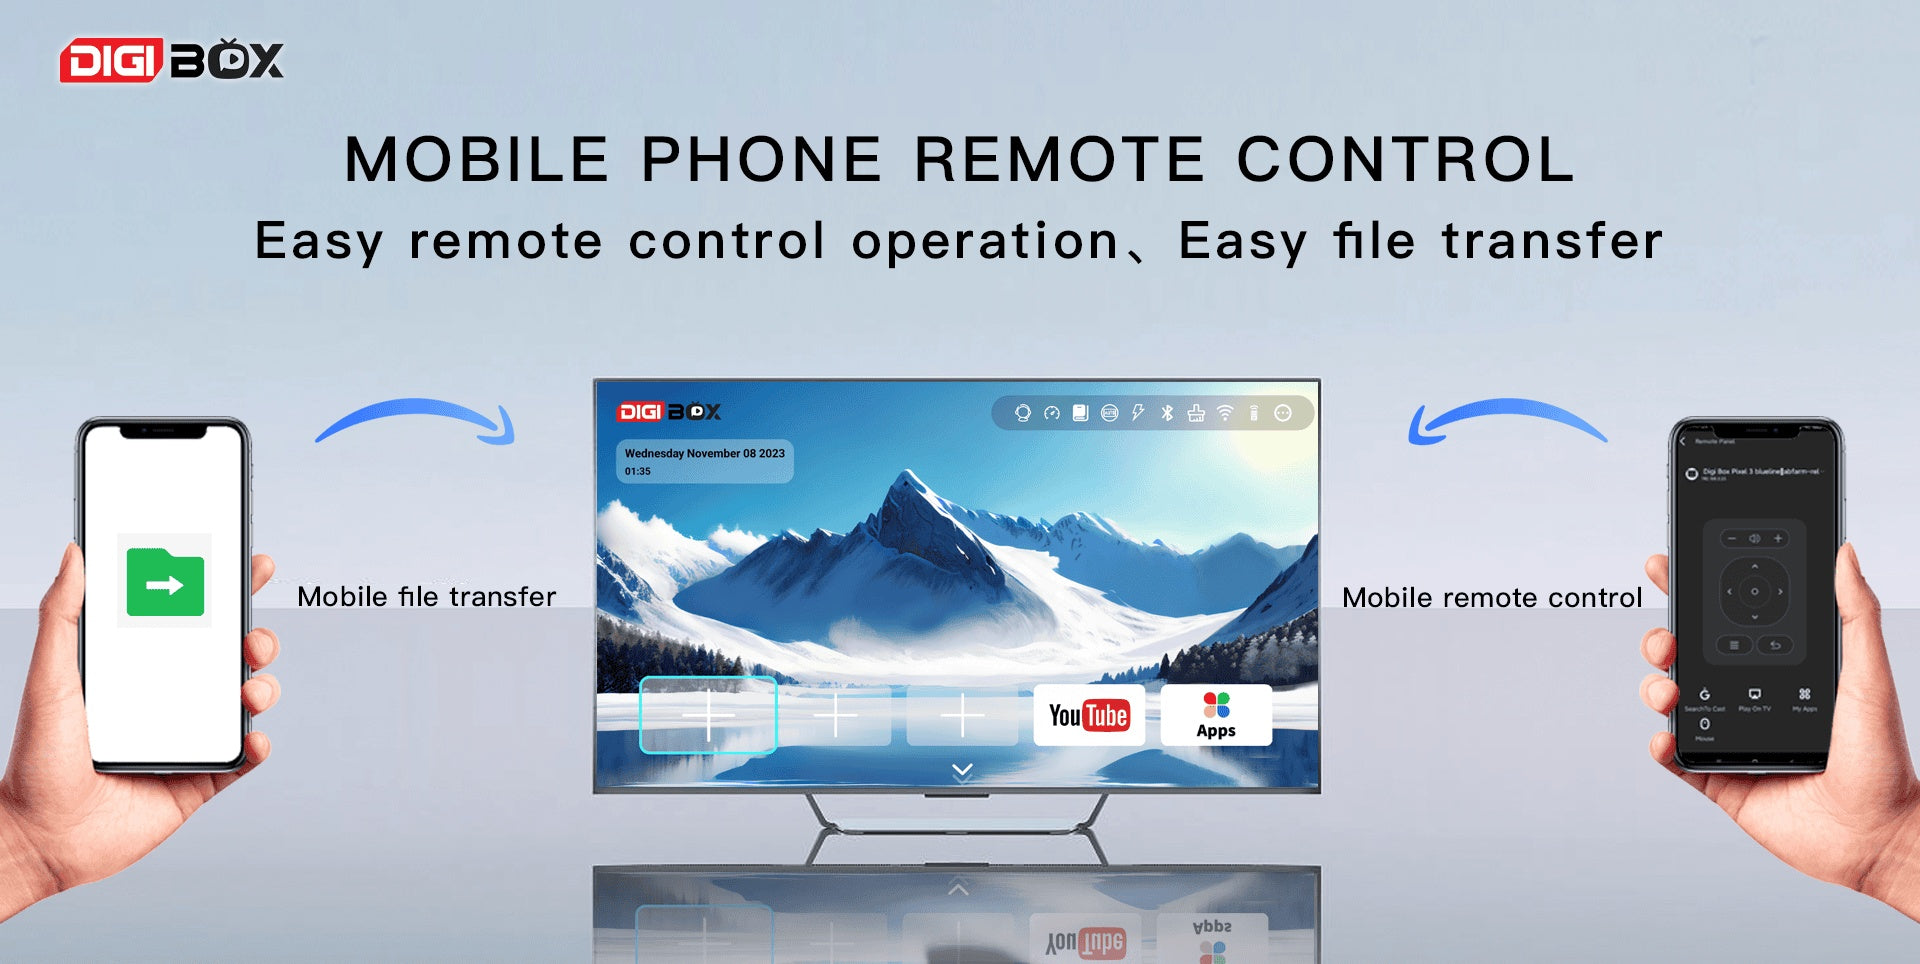 DIGIBOX allows you to easily control it with your mobile phone, transfer files and operate it easily.